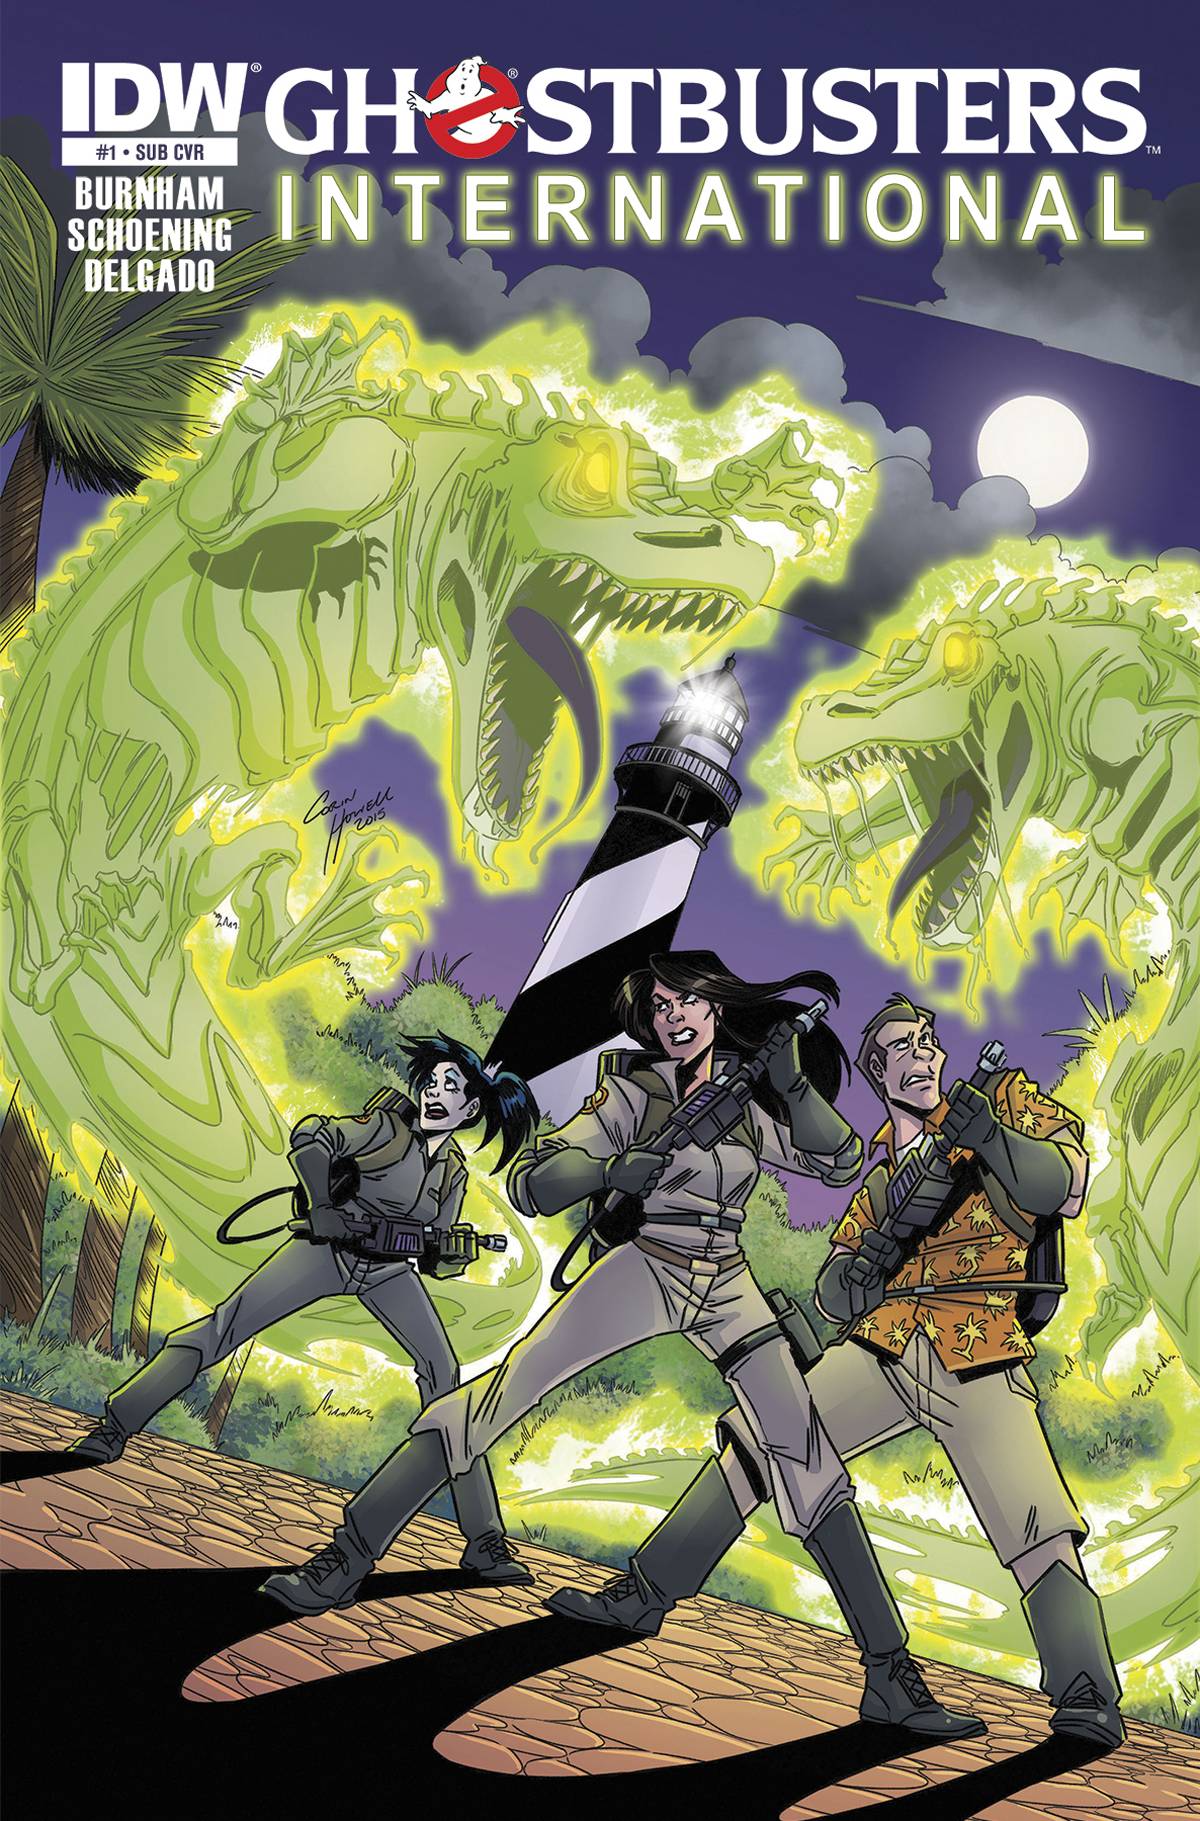 Ghostbusters International #1 Subscription Variant